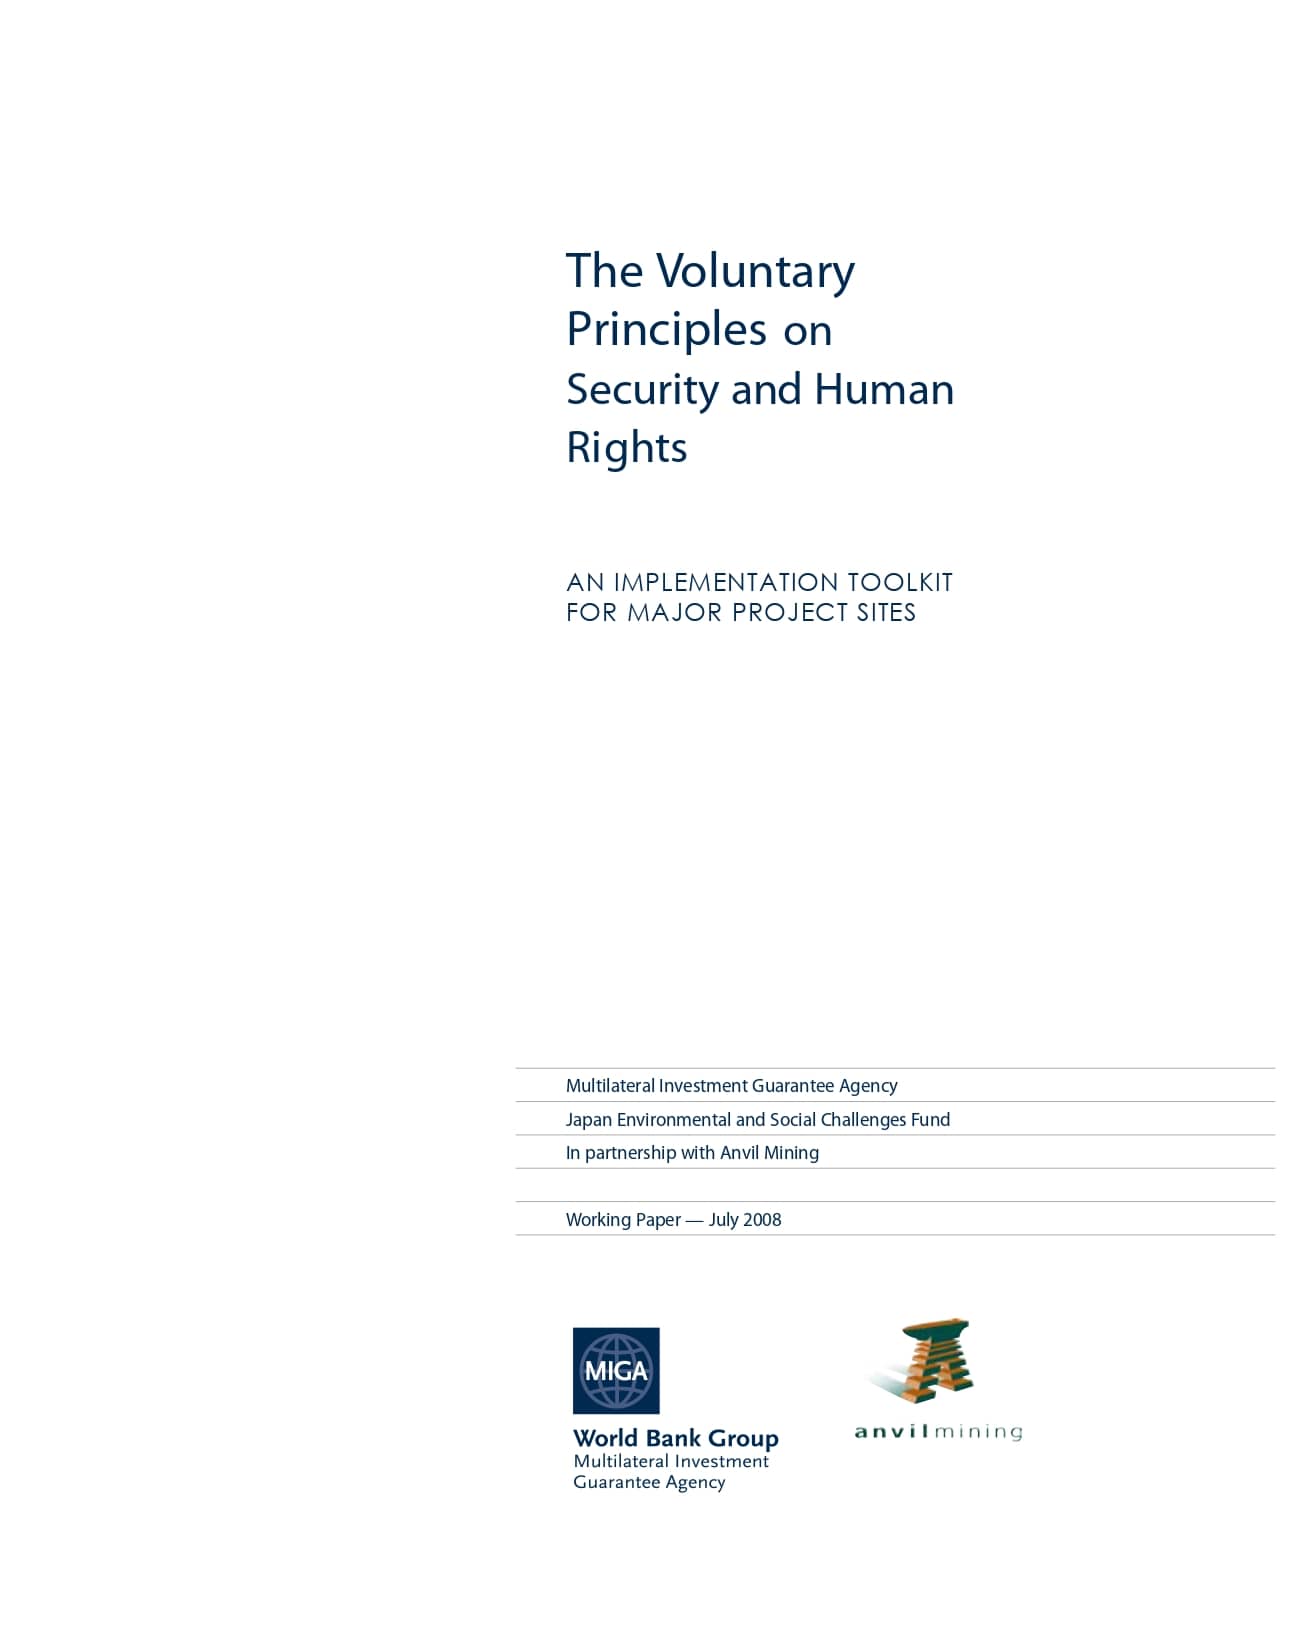 The Voluntary Principles on Security and Human Rights: An Implementation Toolkit for Major Project Sites (World Bank Group Multilateral Investment Guarantee Agency and Anvil Mining, 2008)